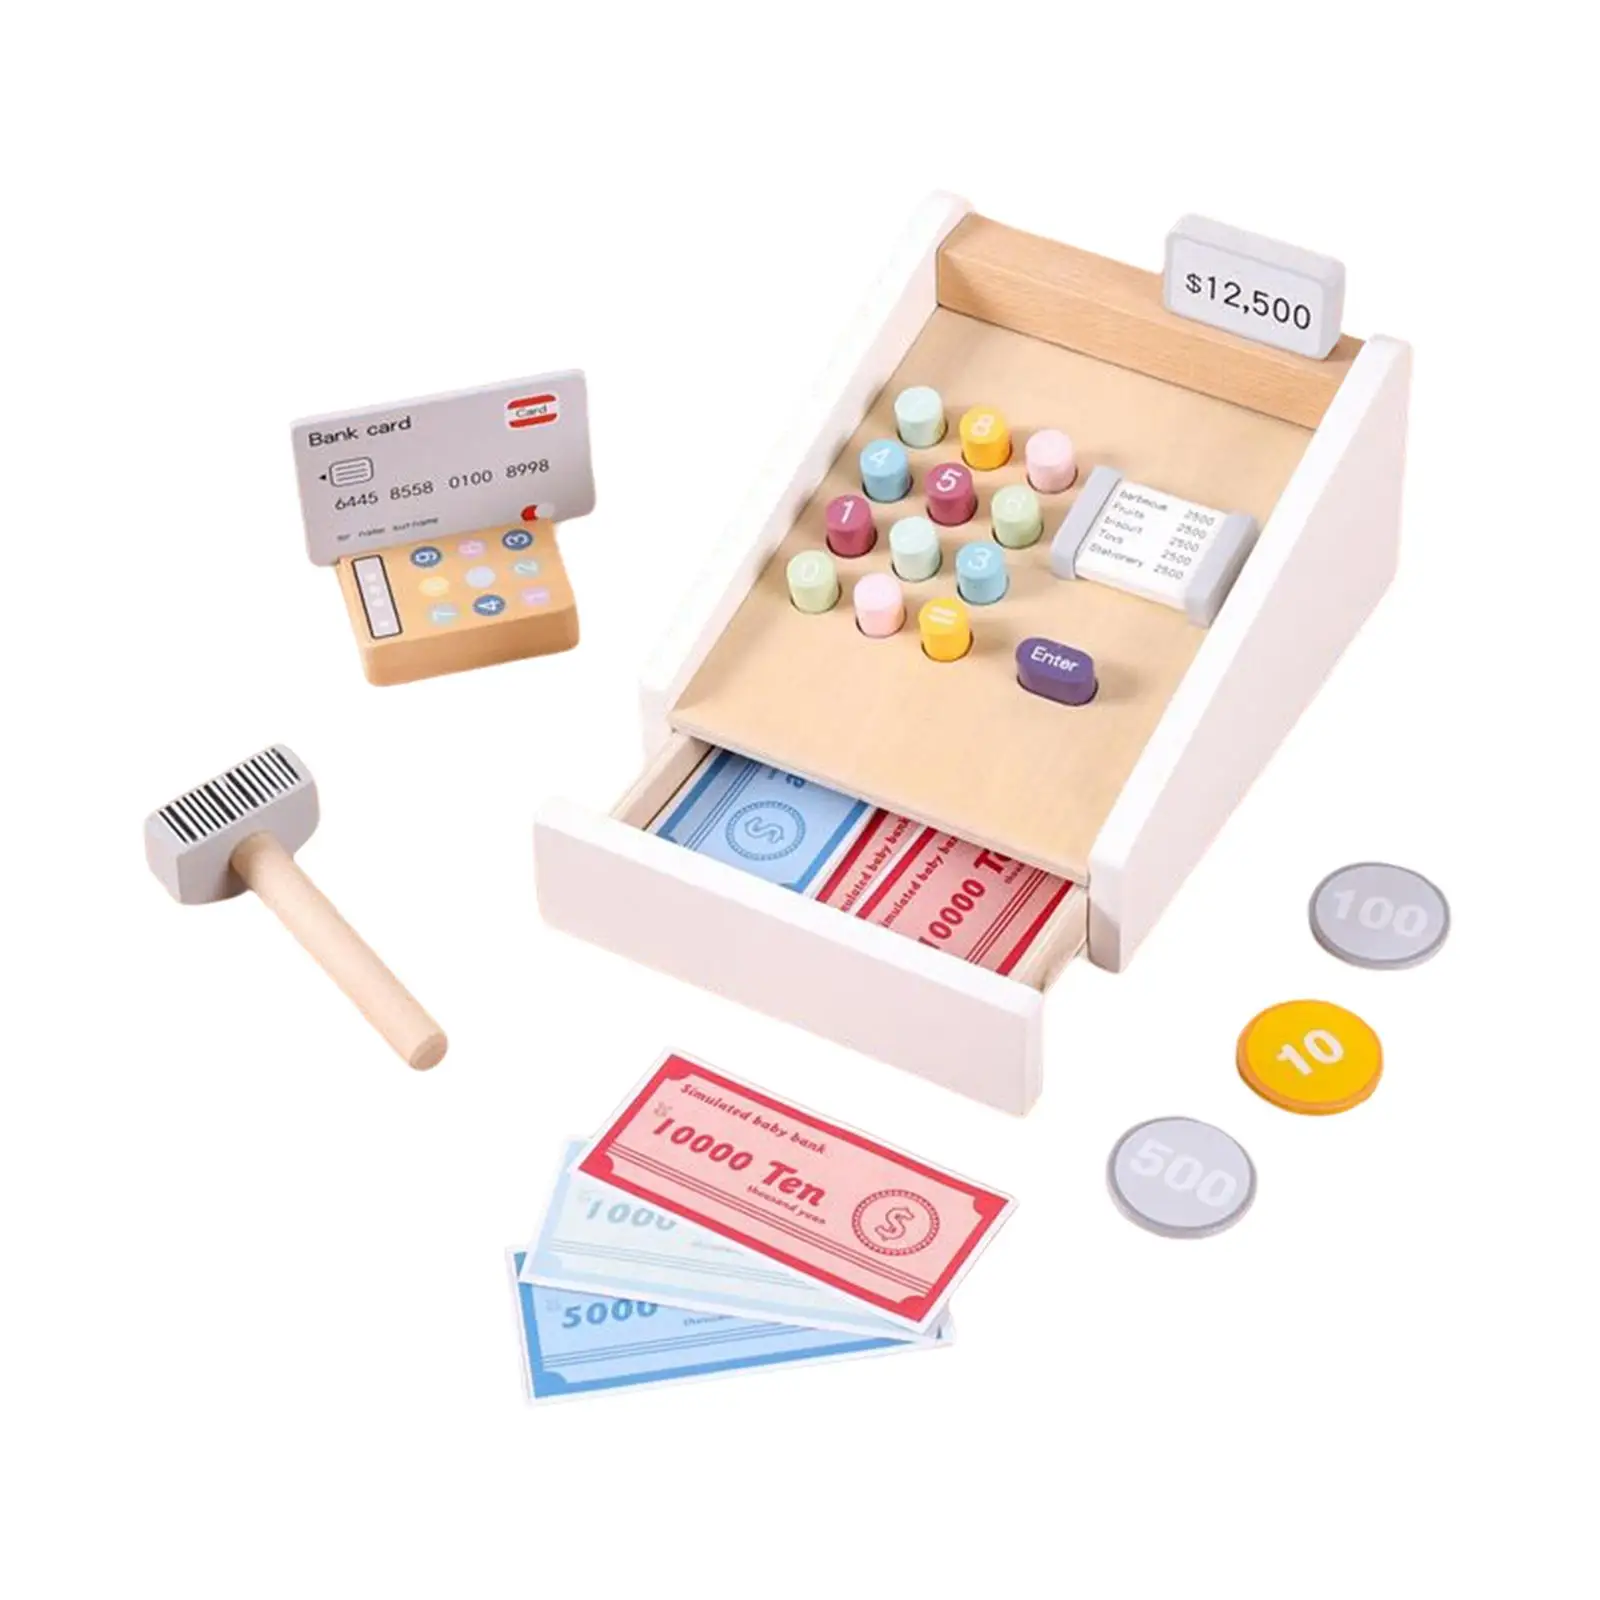 Simulation Cash Register Pretend Play with Accessories Social for Girls Boys